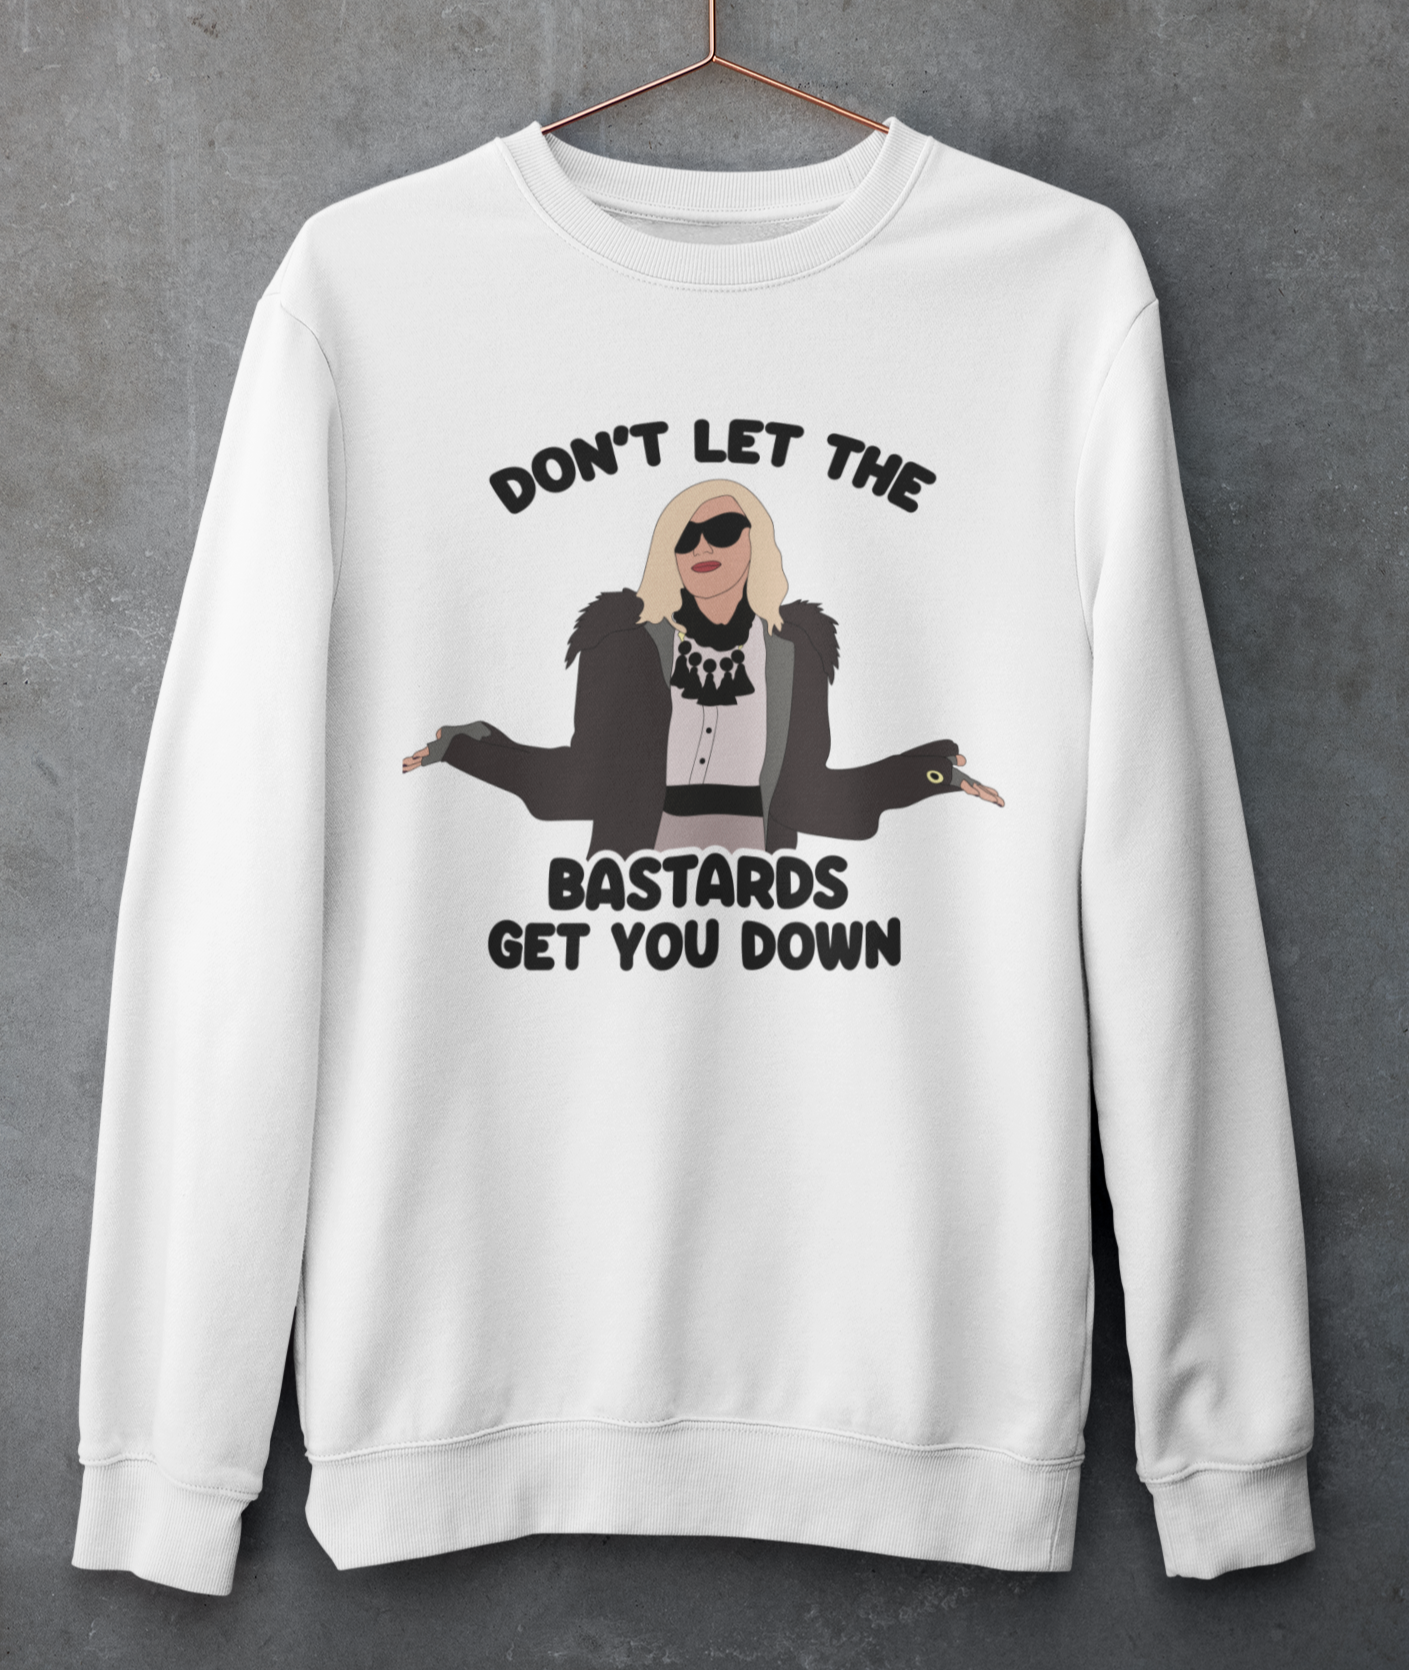 White sweatshirt with moira rose from schitt's creek saying don't let the bastards get you down - HighCiti